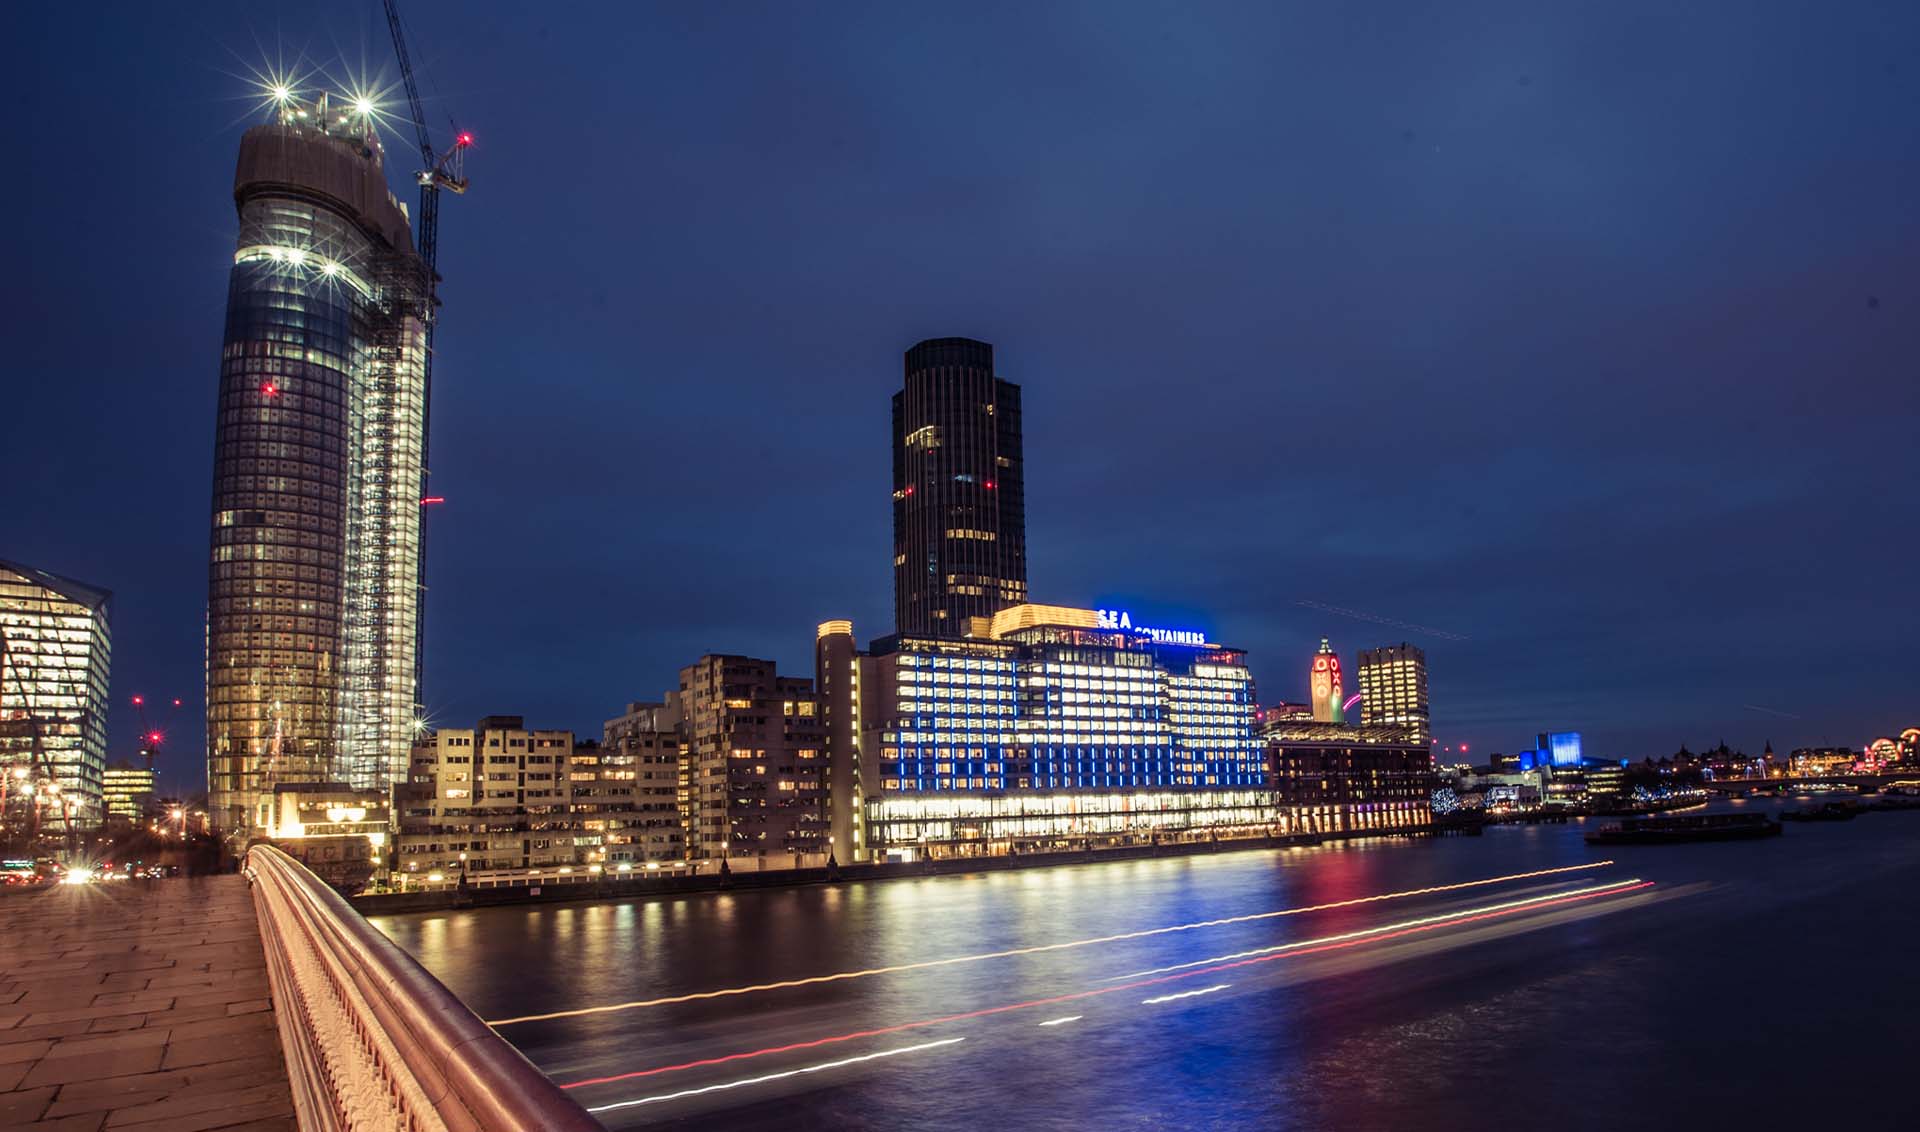 Sea Containers building at night